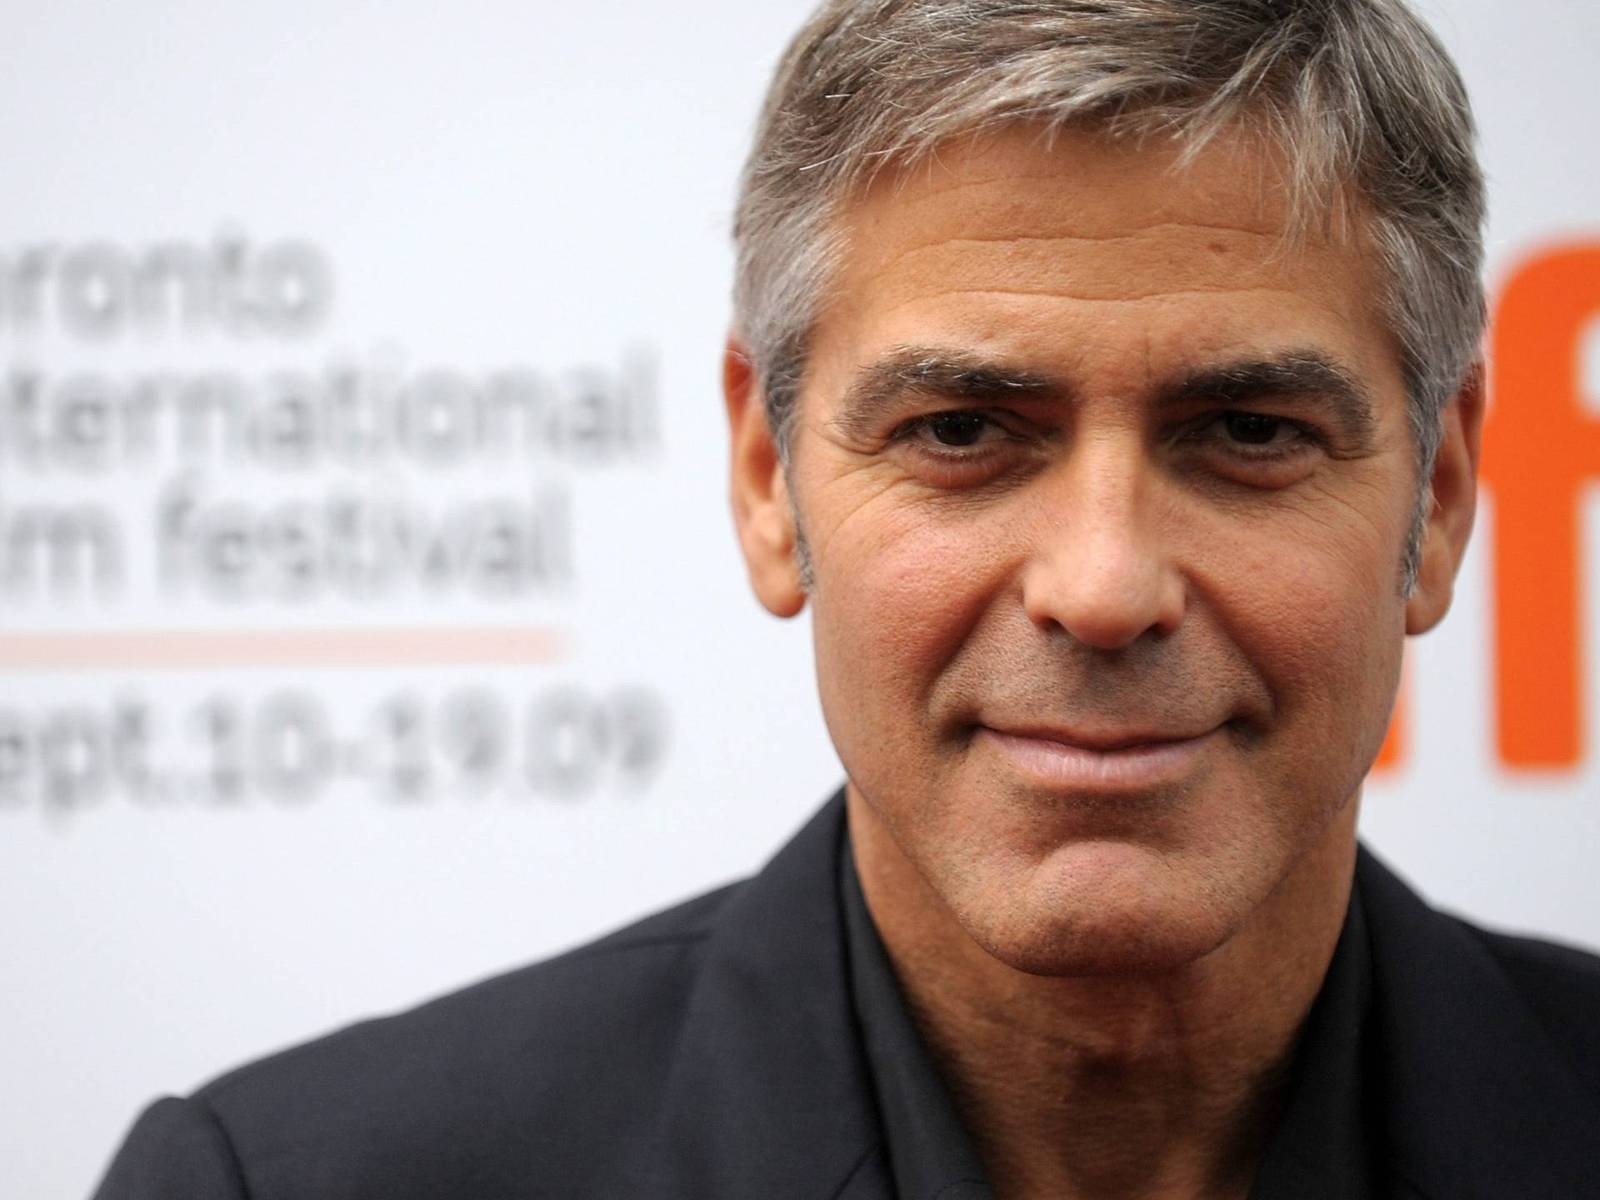 George Clooney Smile for 1600 x 1200 resolution